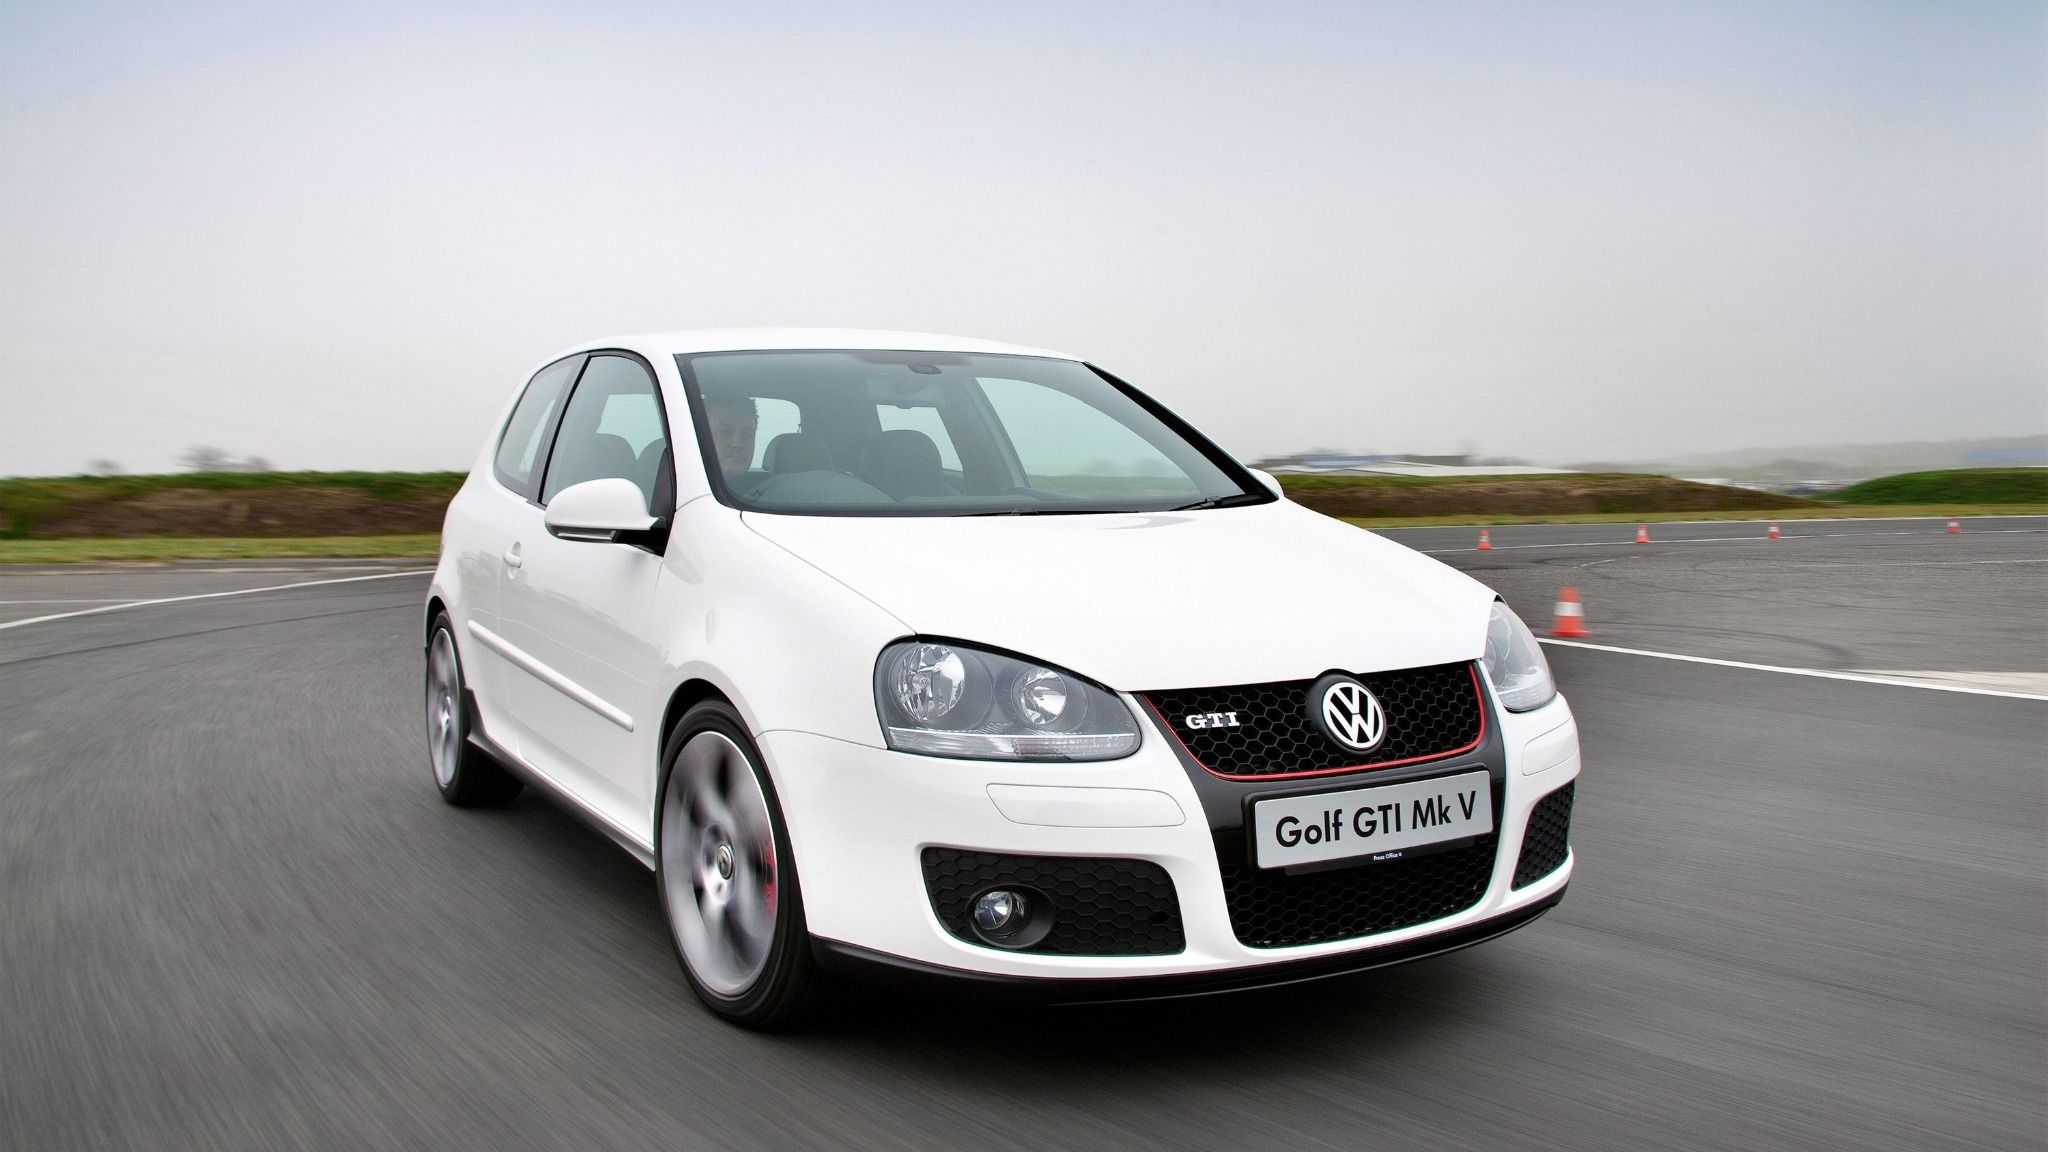 Front view of a white VW Golf GTI MkV